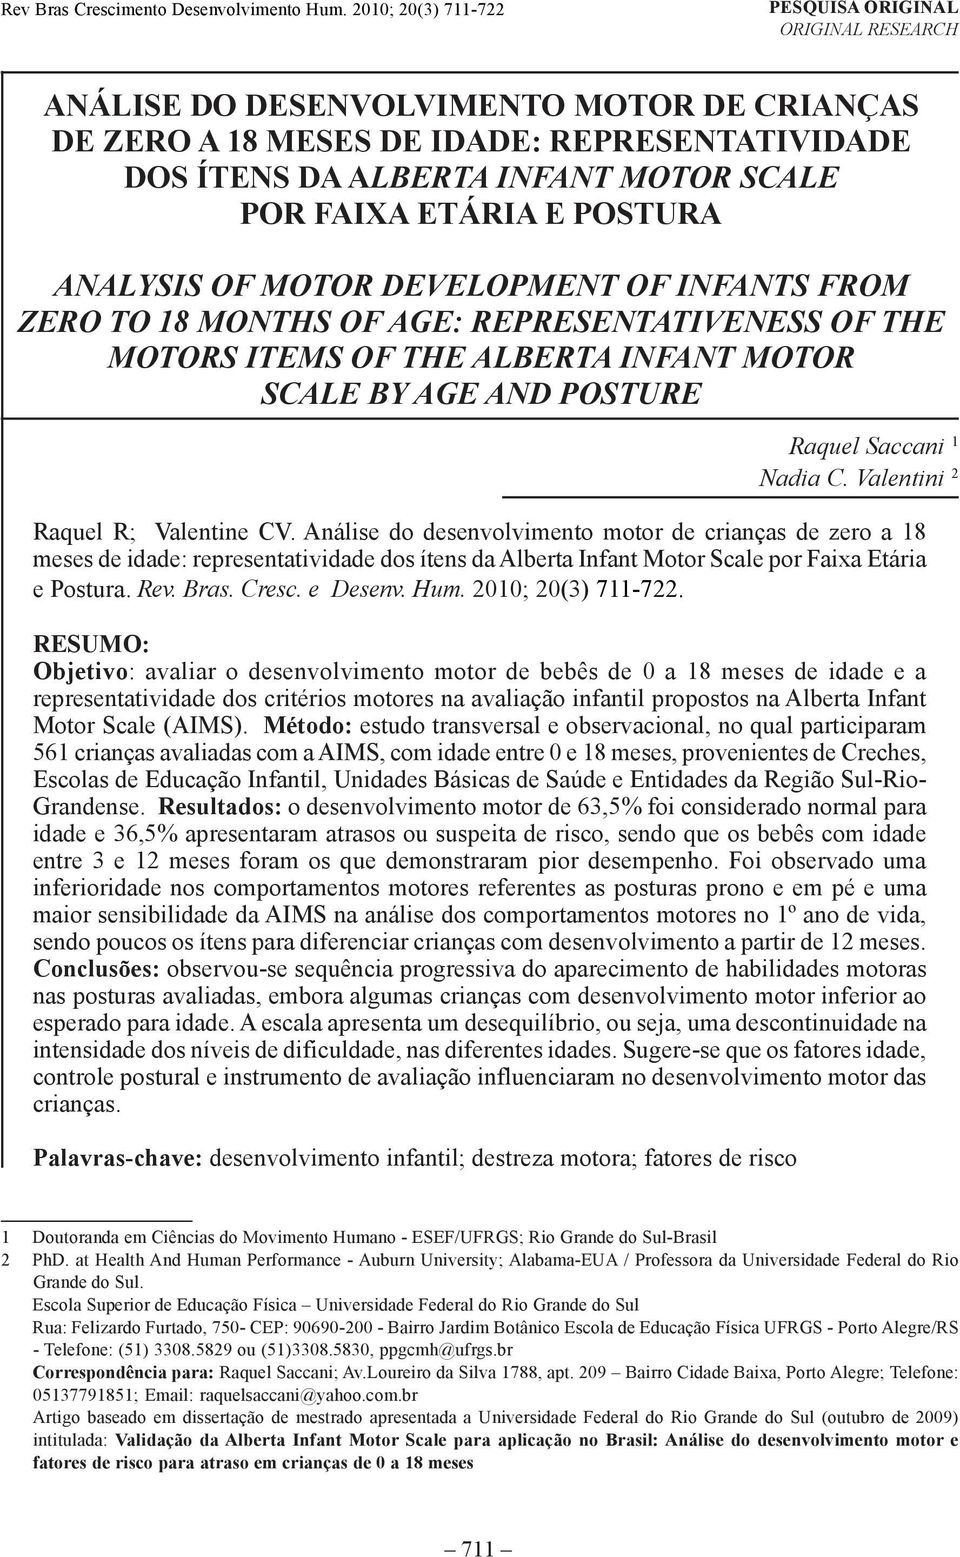 ETÁRIA E POSTURA ANALYSIS OF MOTOR DEVELOPMENT OF INFANTS FROM ZERO TO 18 MONTHS OF AGE: REPRESENTATIVENESS OF THE MOTORS ITEMS OF THE ALBERTA INFANT MOTOR SCALE BY AGE AND POSTURE Raquel Saccani 1